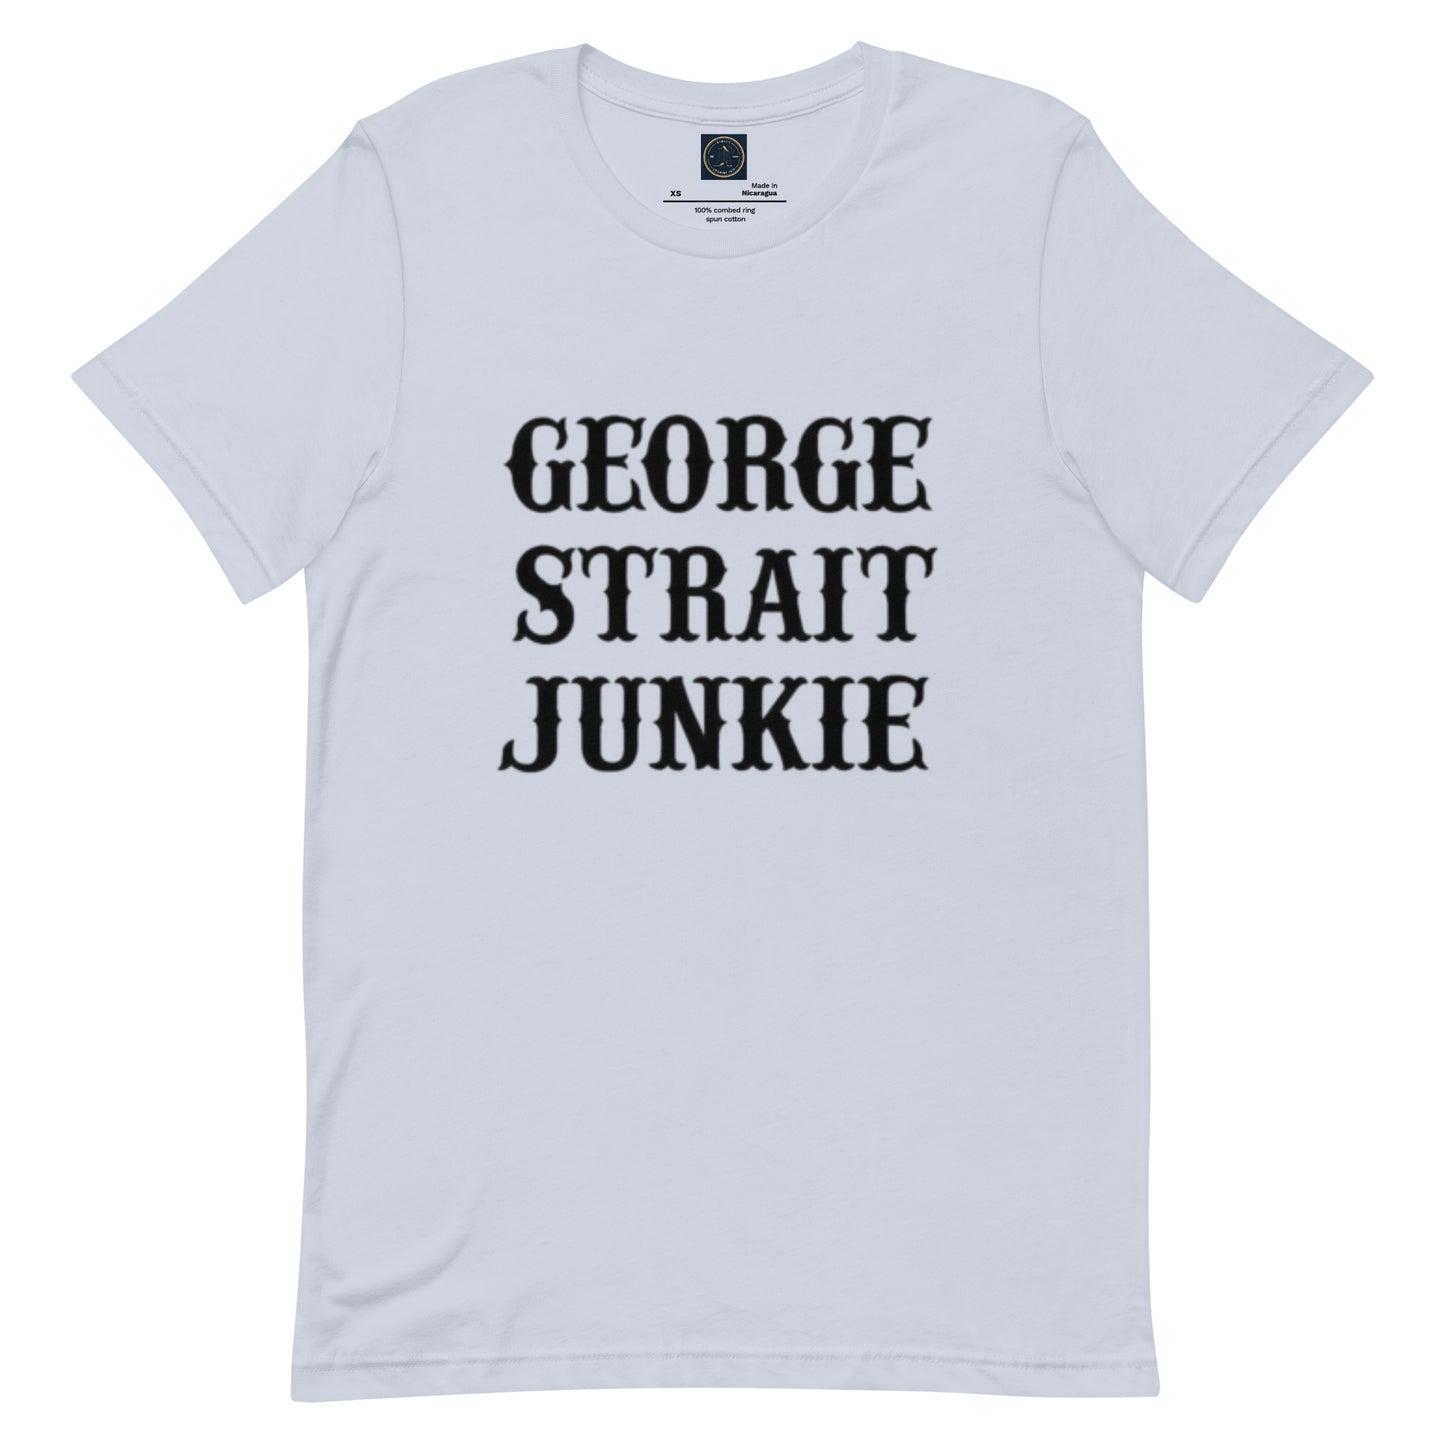 Junkie - Classic Country Tees